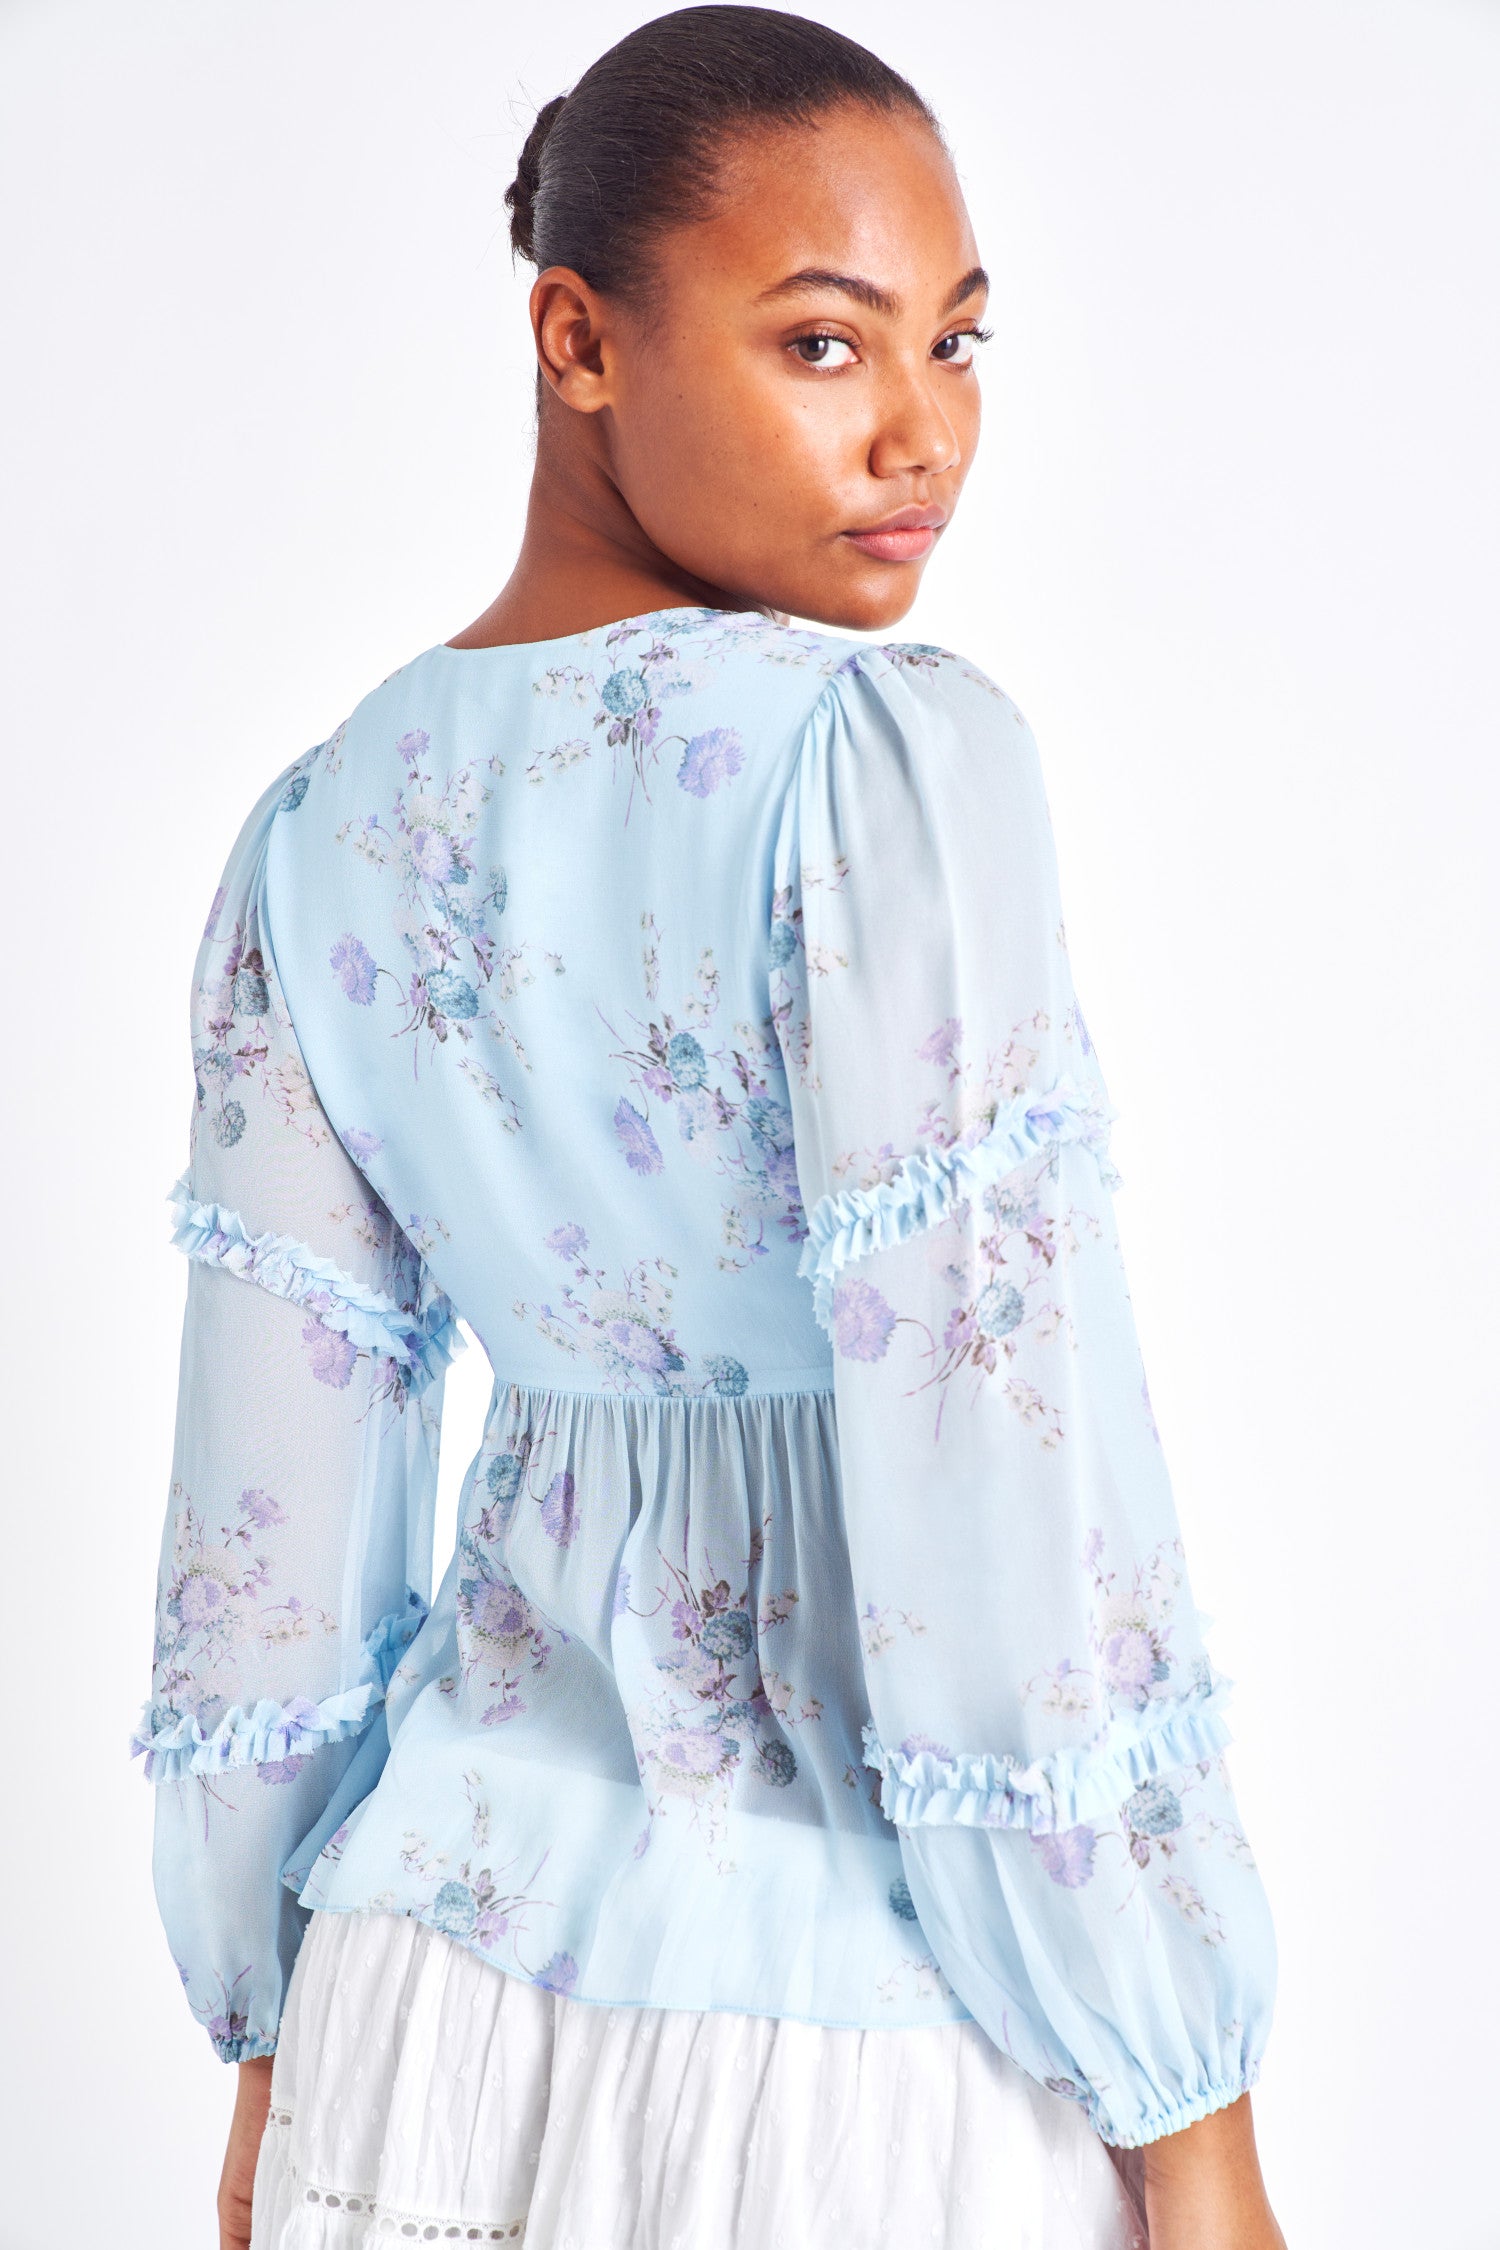 Light blue floral blouse with long ruffle sleeves, smocked shoulders, and subtle buttons down the center.